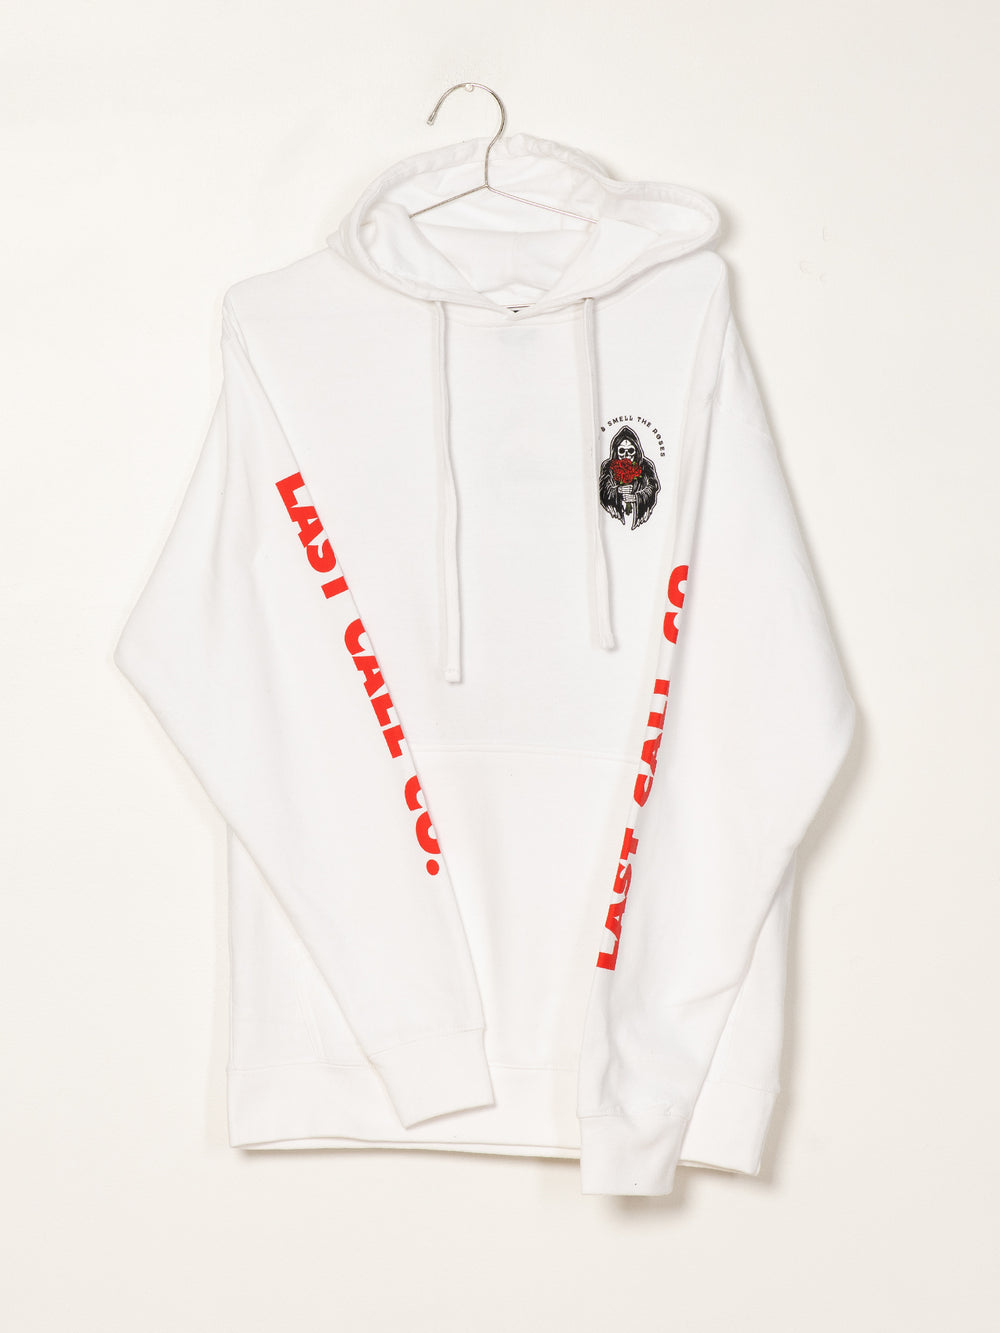 LAST CALL ROSES PULLOVER HOODIE - BLANC - DÉSTOCKAGE